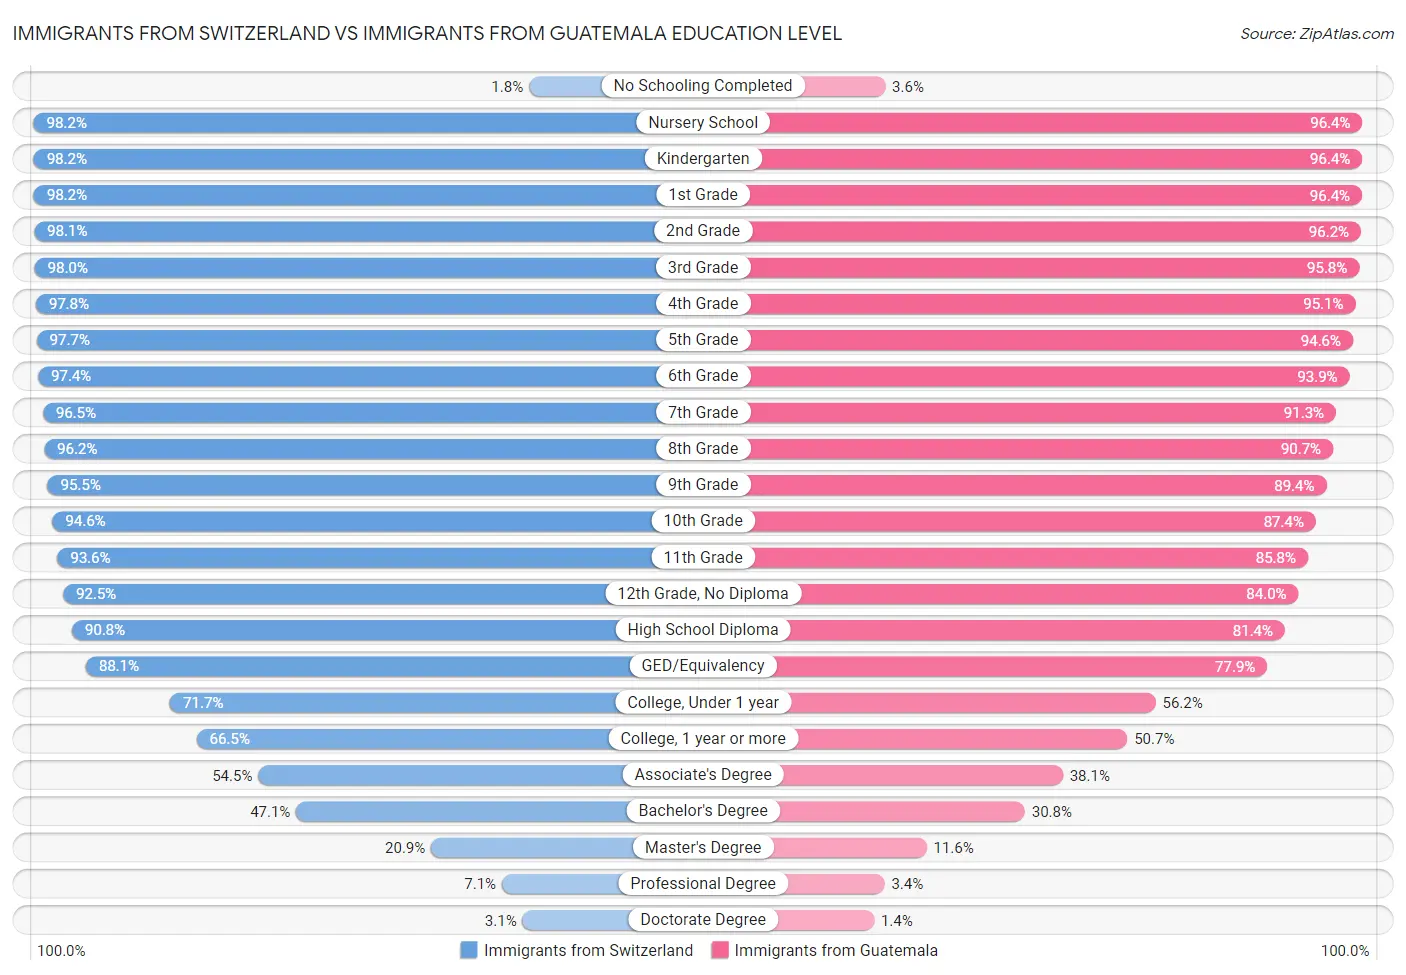 Immigrants from Switzerland vs Immigrants from Guatemala Education Level